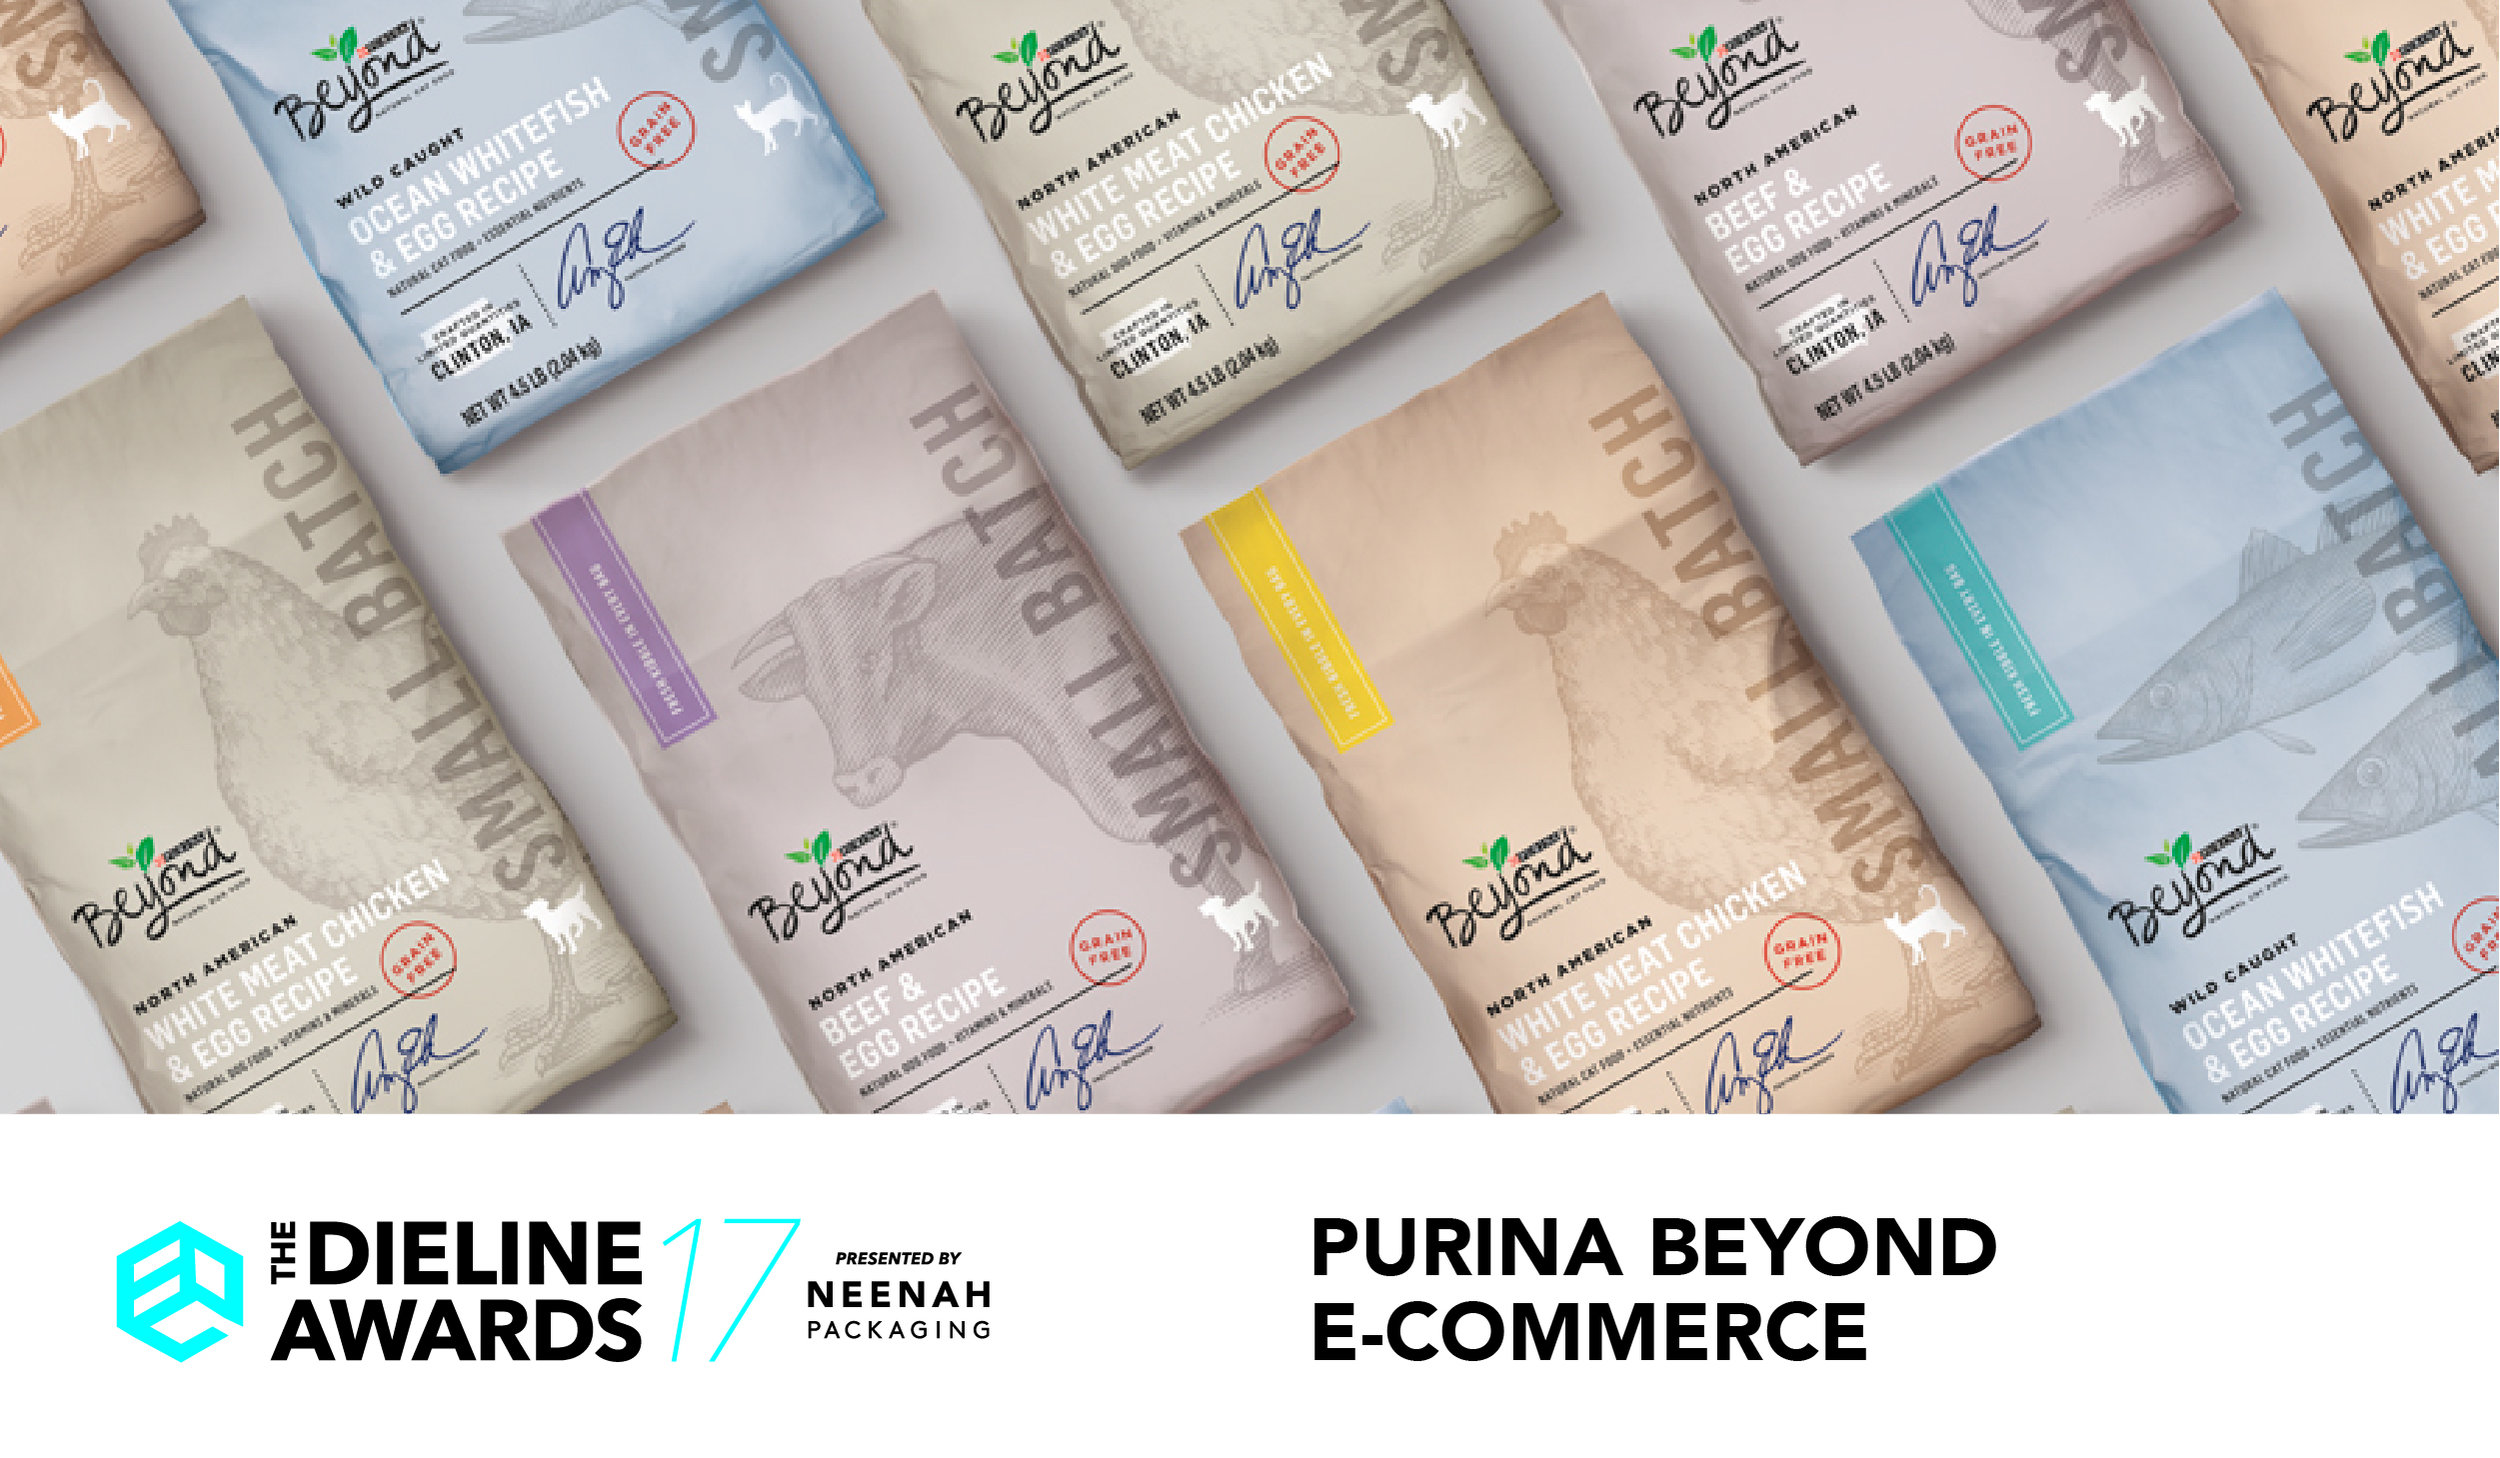 The Dieline Awards 2017 Outstanding Awards: Purina Beyond E-Commerce